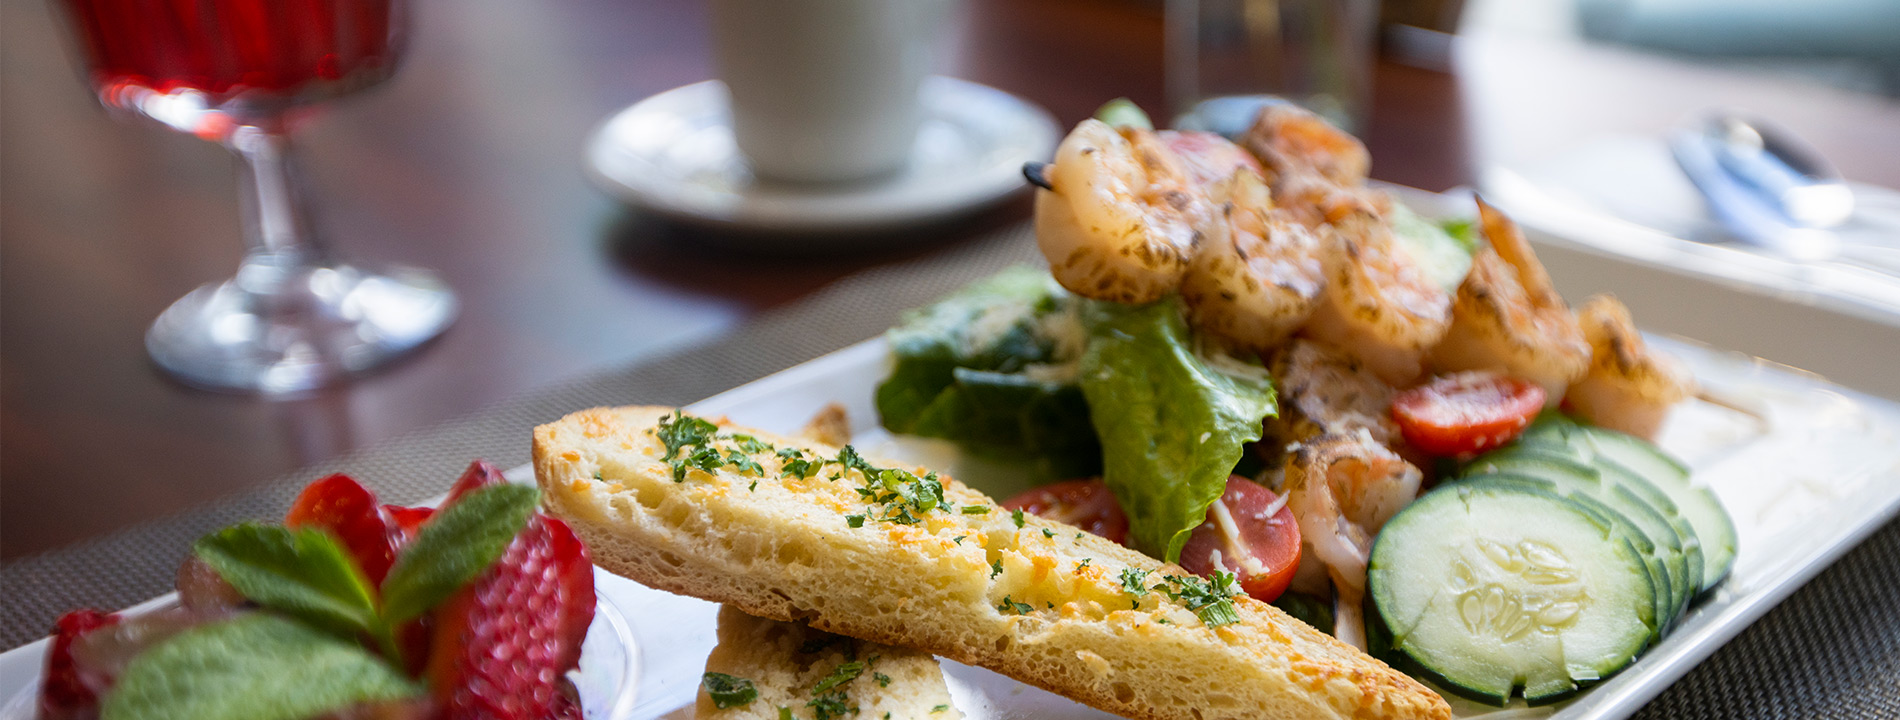 close up of a plate of food consisting of fruit, bread and a salad with grilled shrimp on top